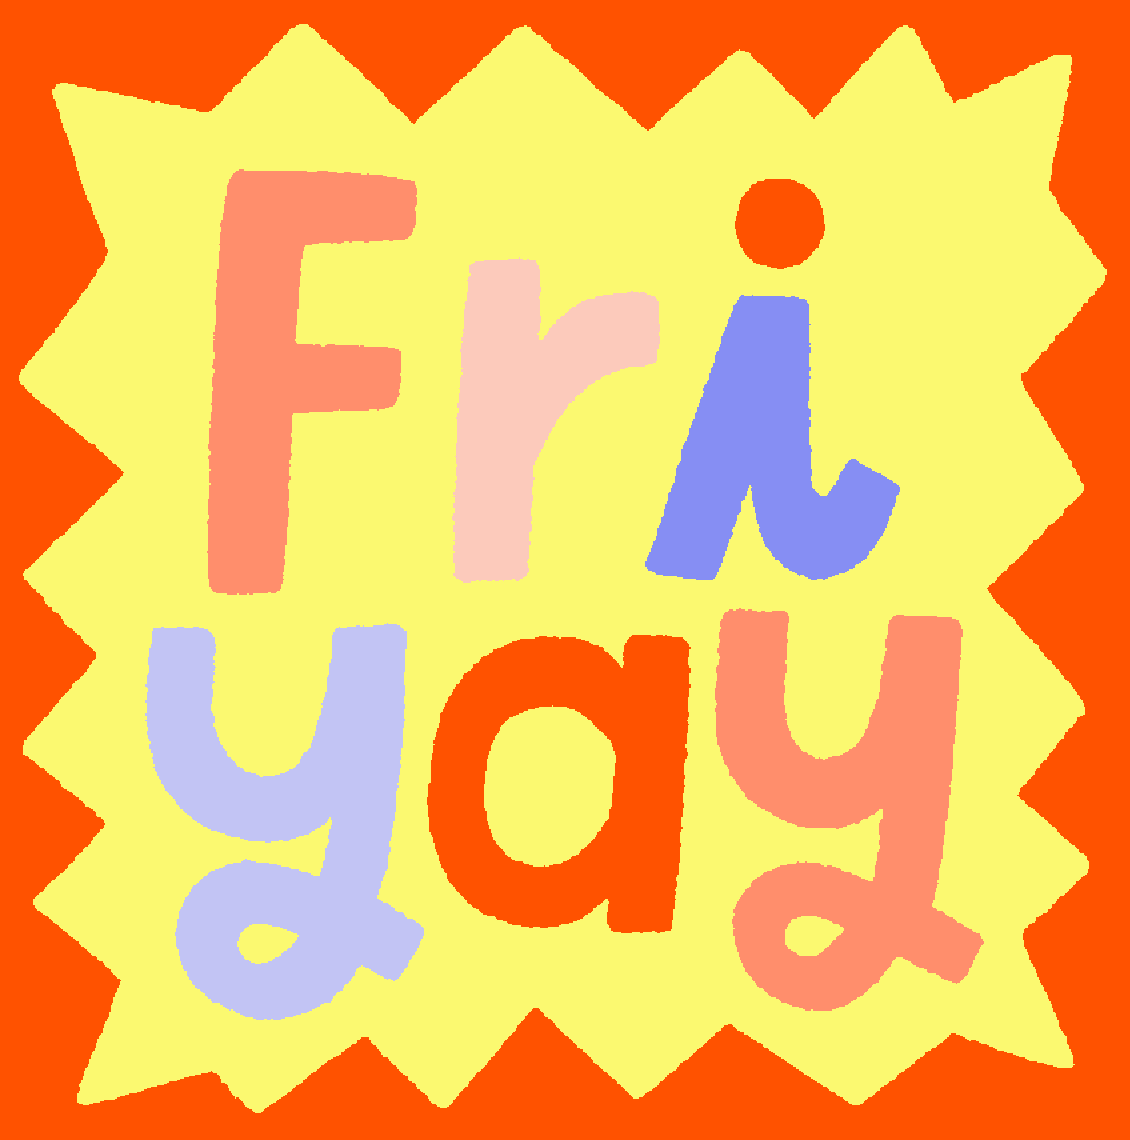 Illustrated gif. A large, jittery text that says, “Fri-yay”. Each letter is a different color of peach, pink, red, and blues. A red jagged frame dances around the text.